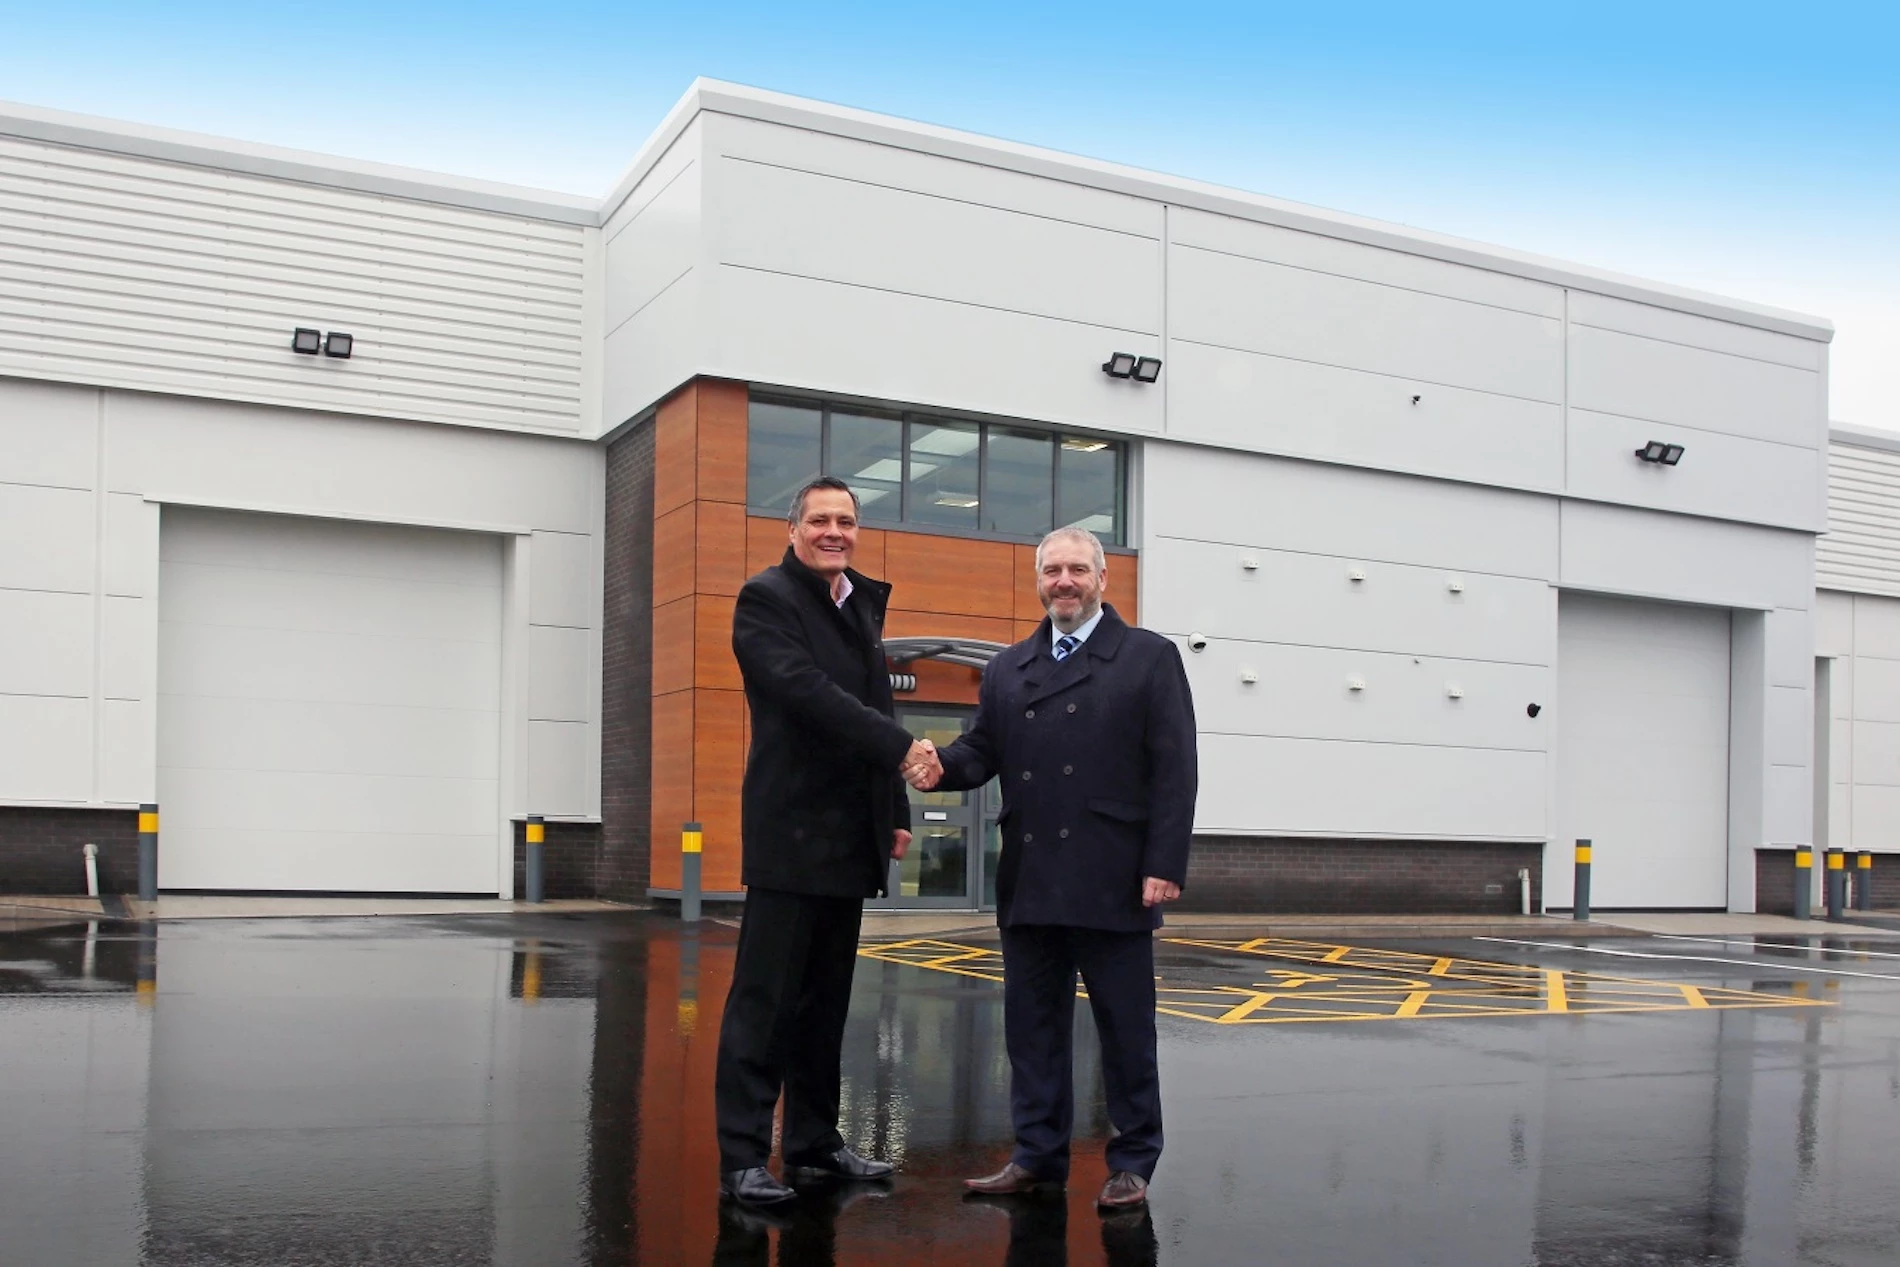 Paul Carnell and Bill Mordue at Bullrush Grove Business Park, Doncaster.